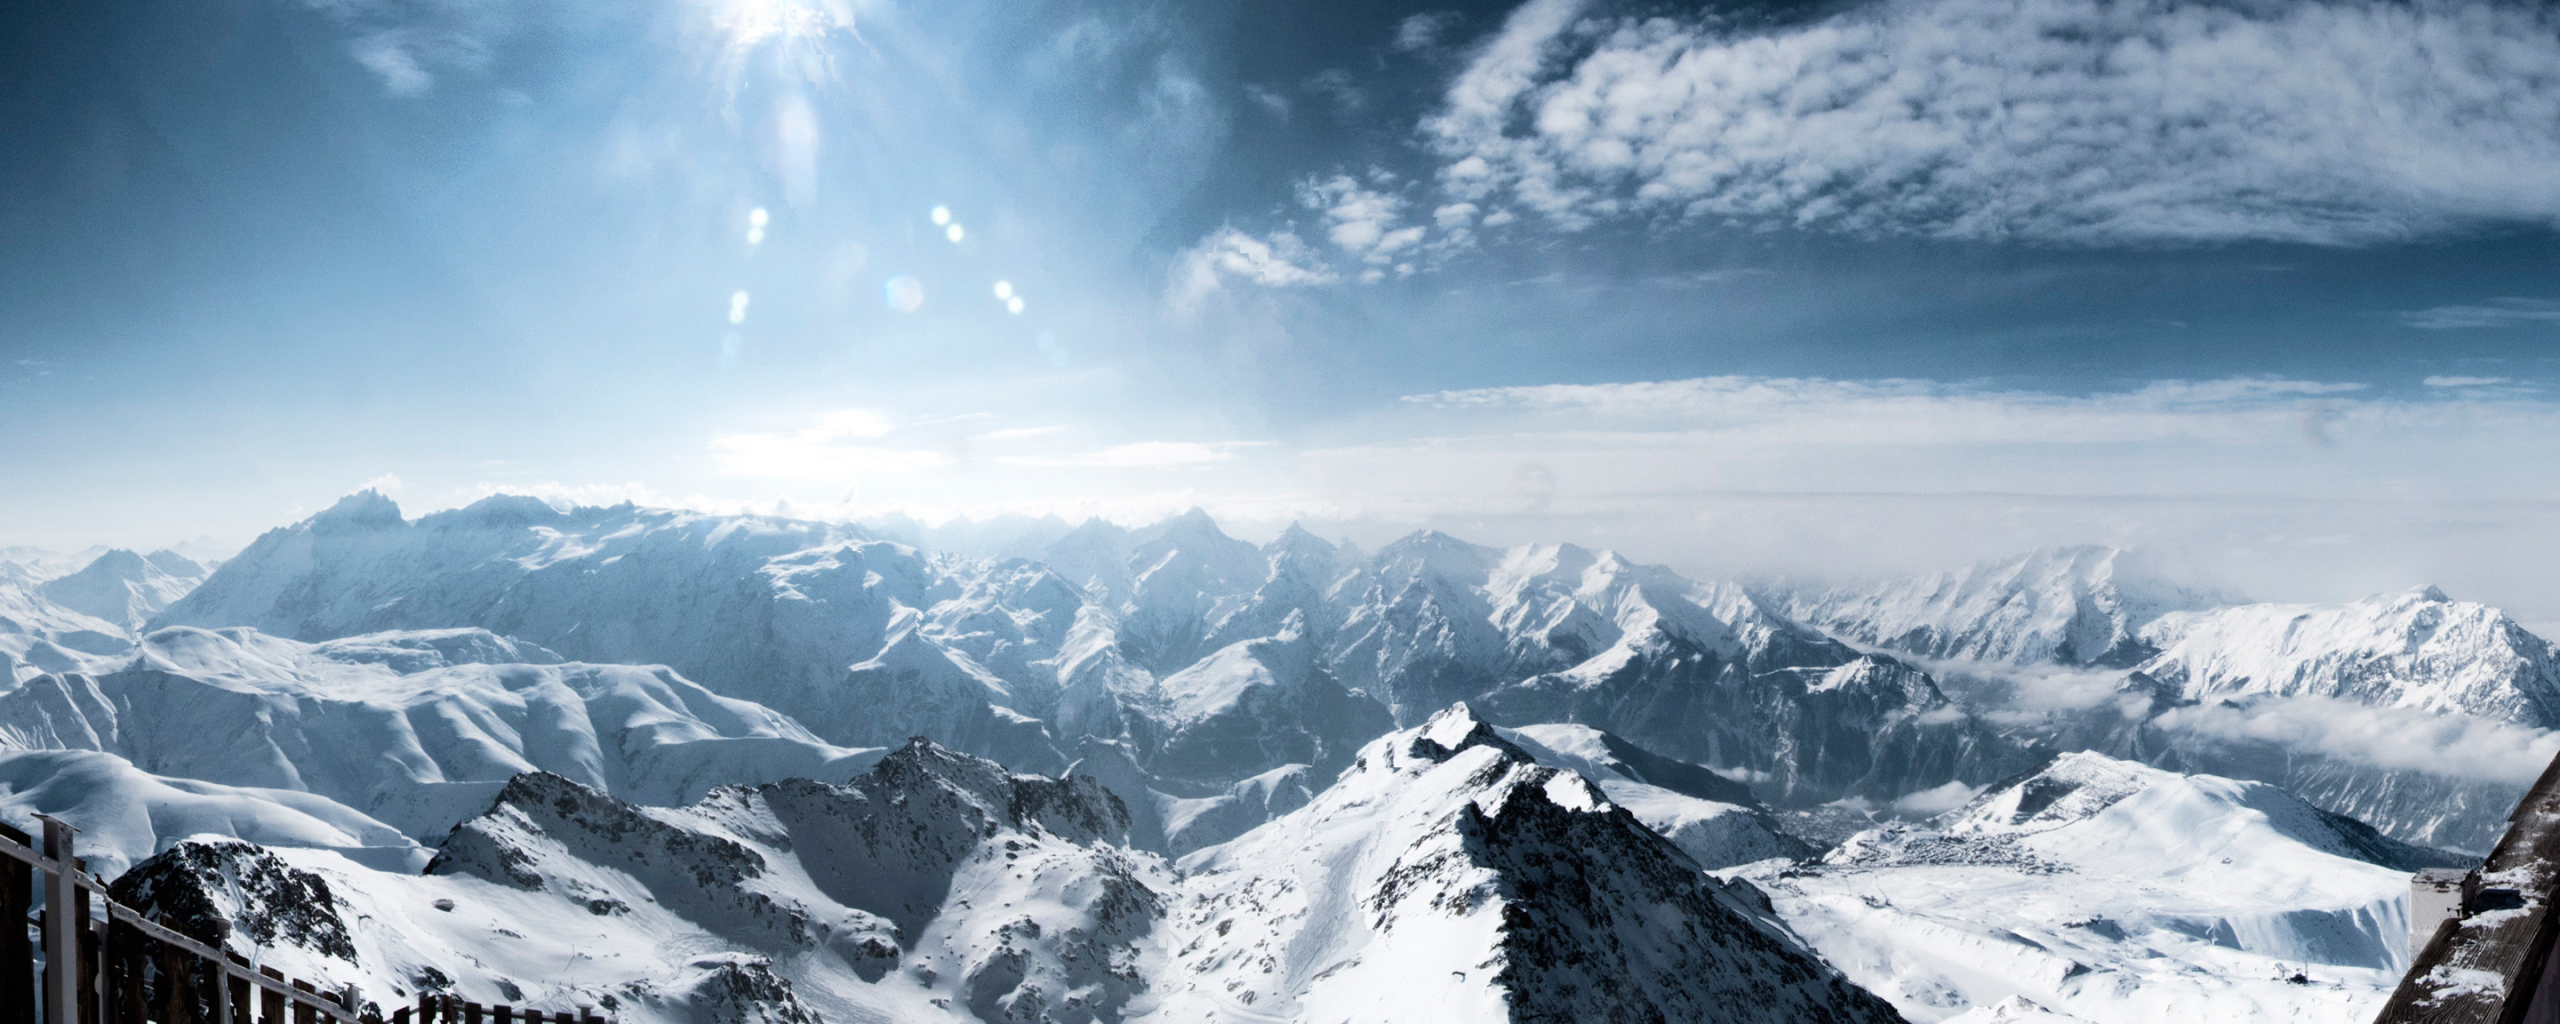 Download mountains, french alps, winter, snow, sunny day 2560x1024 wallpaper, dual wide 21:9 2560x1024 HD image, background, 7589